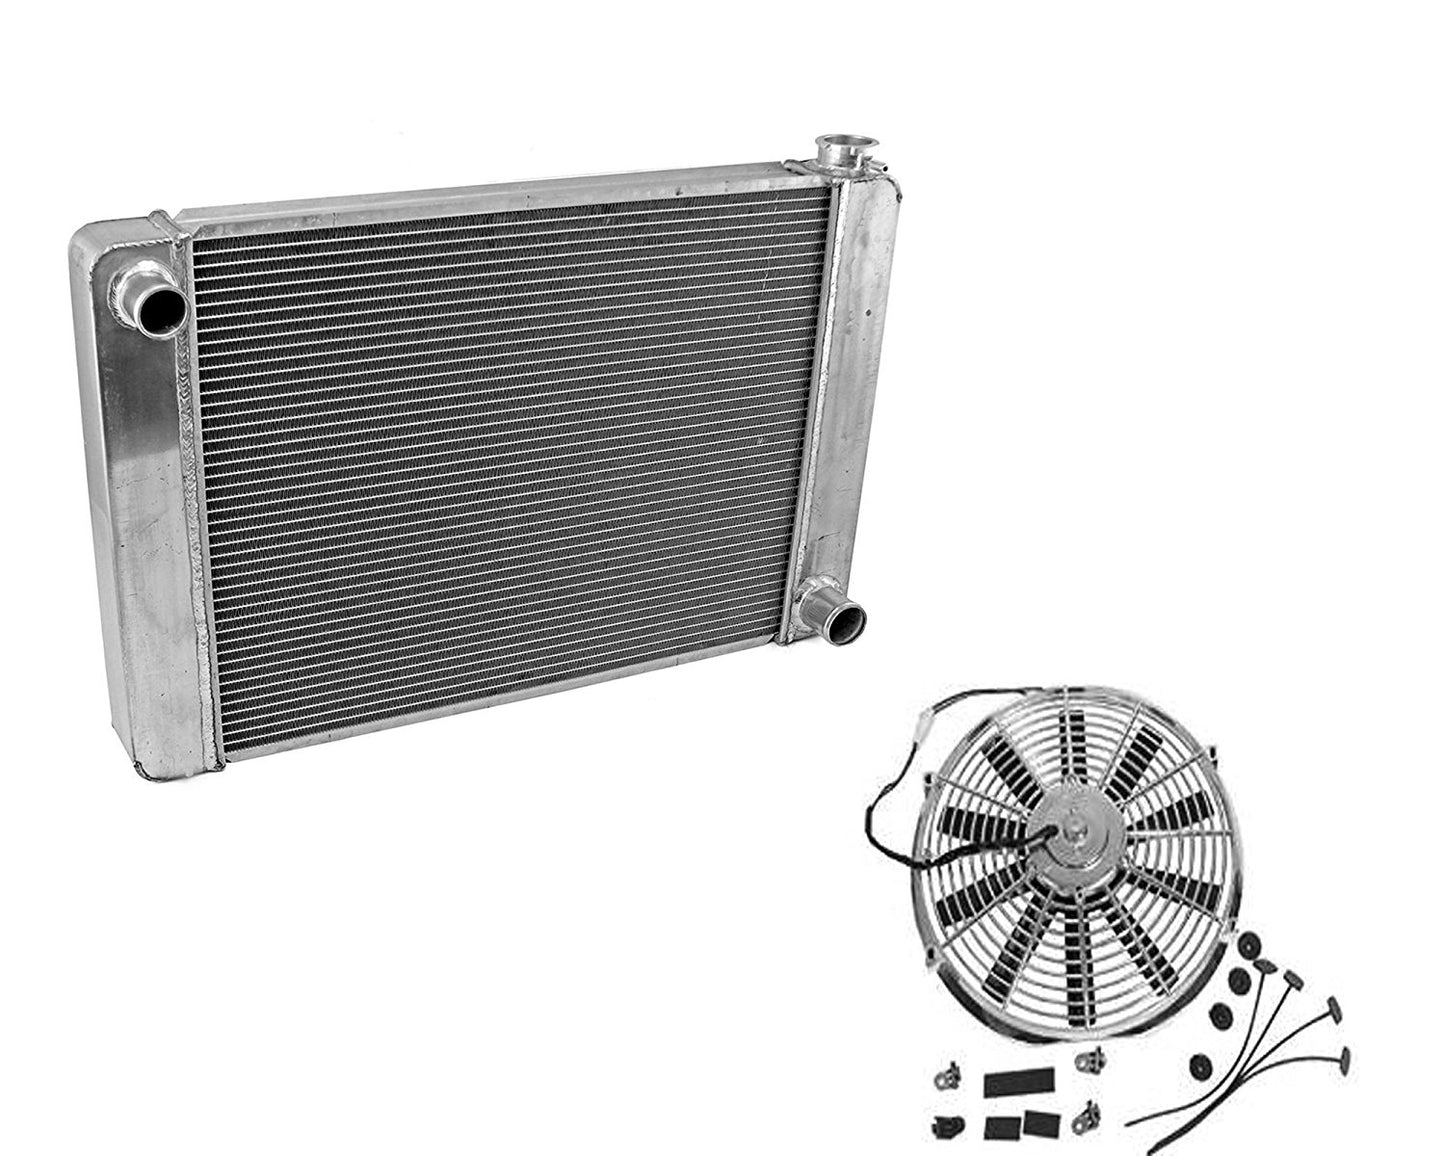 For SBC BBC Chevy GM Fabricated Aluminum Radiator 22" x 19" x3" & 12" Chrome Straight Blade Reversible Cooling Fan